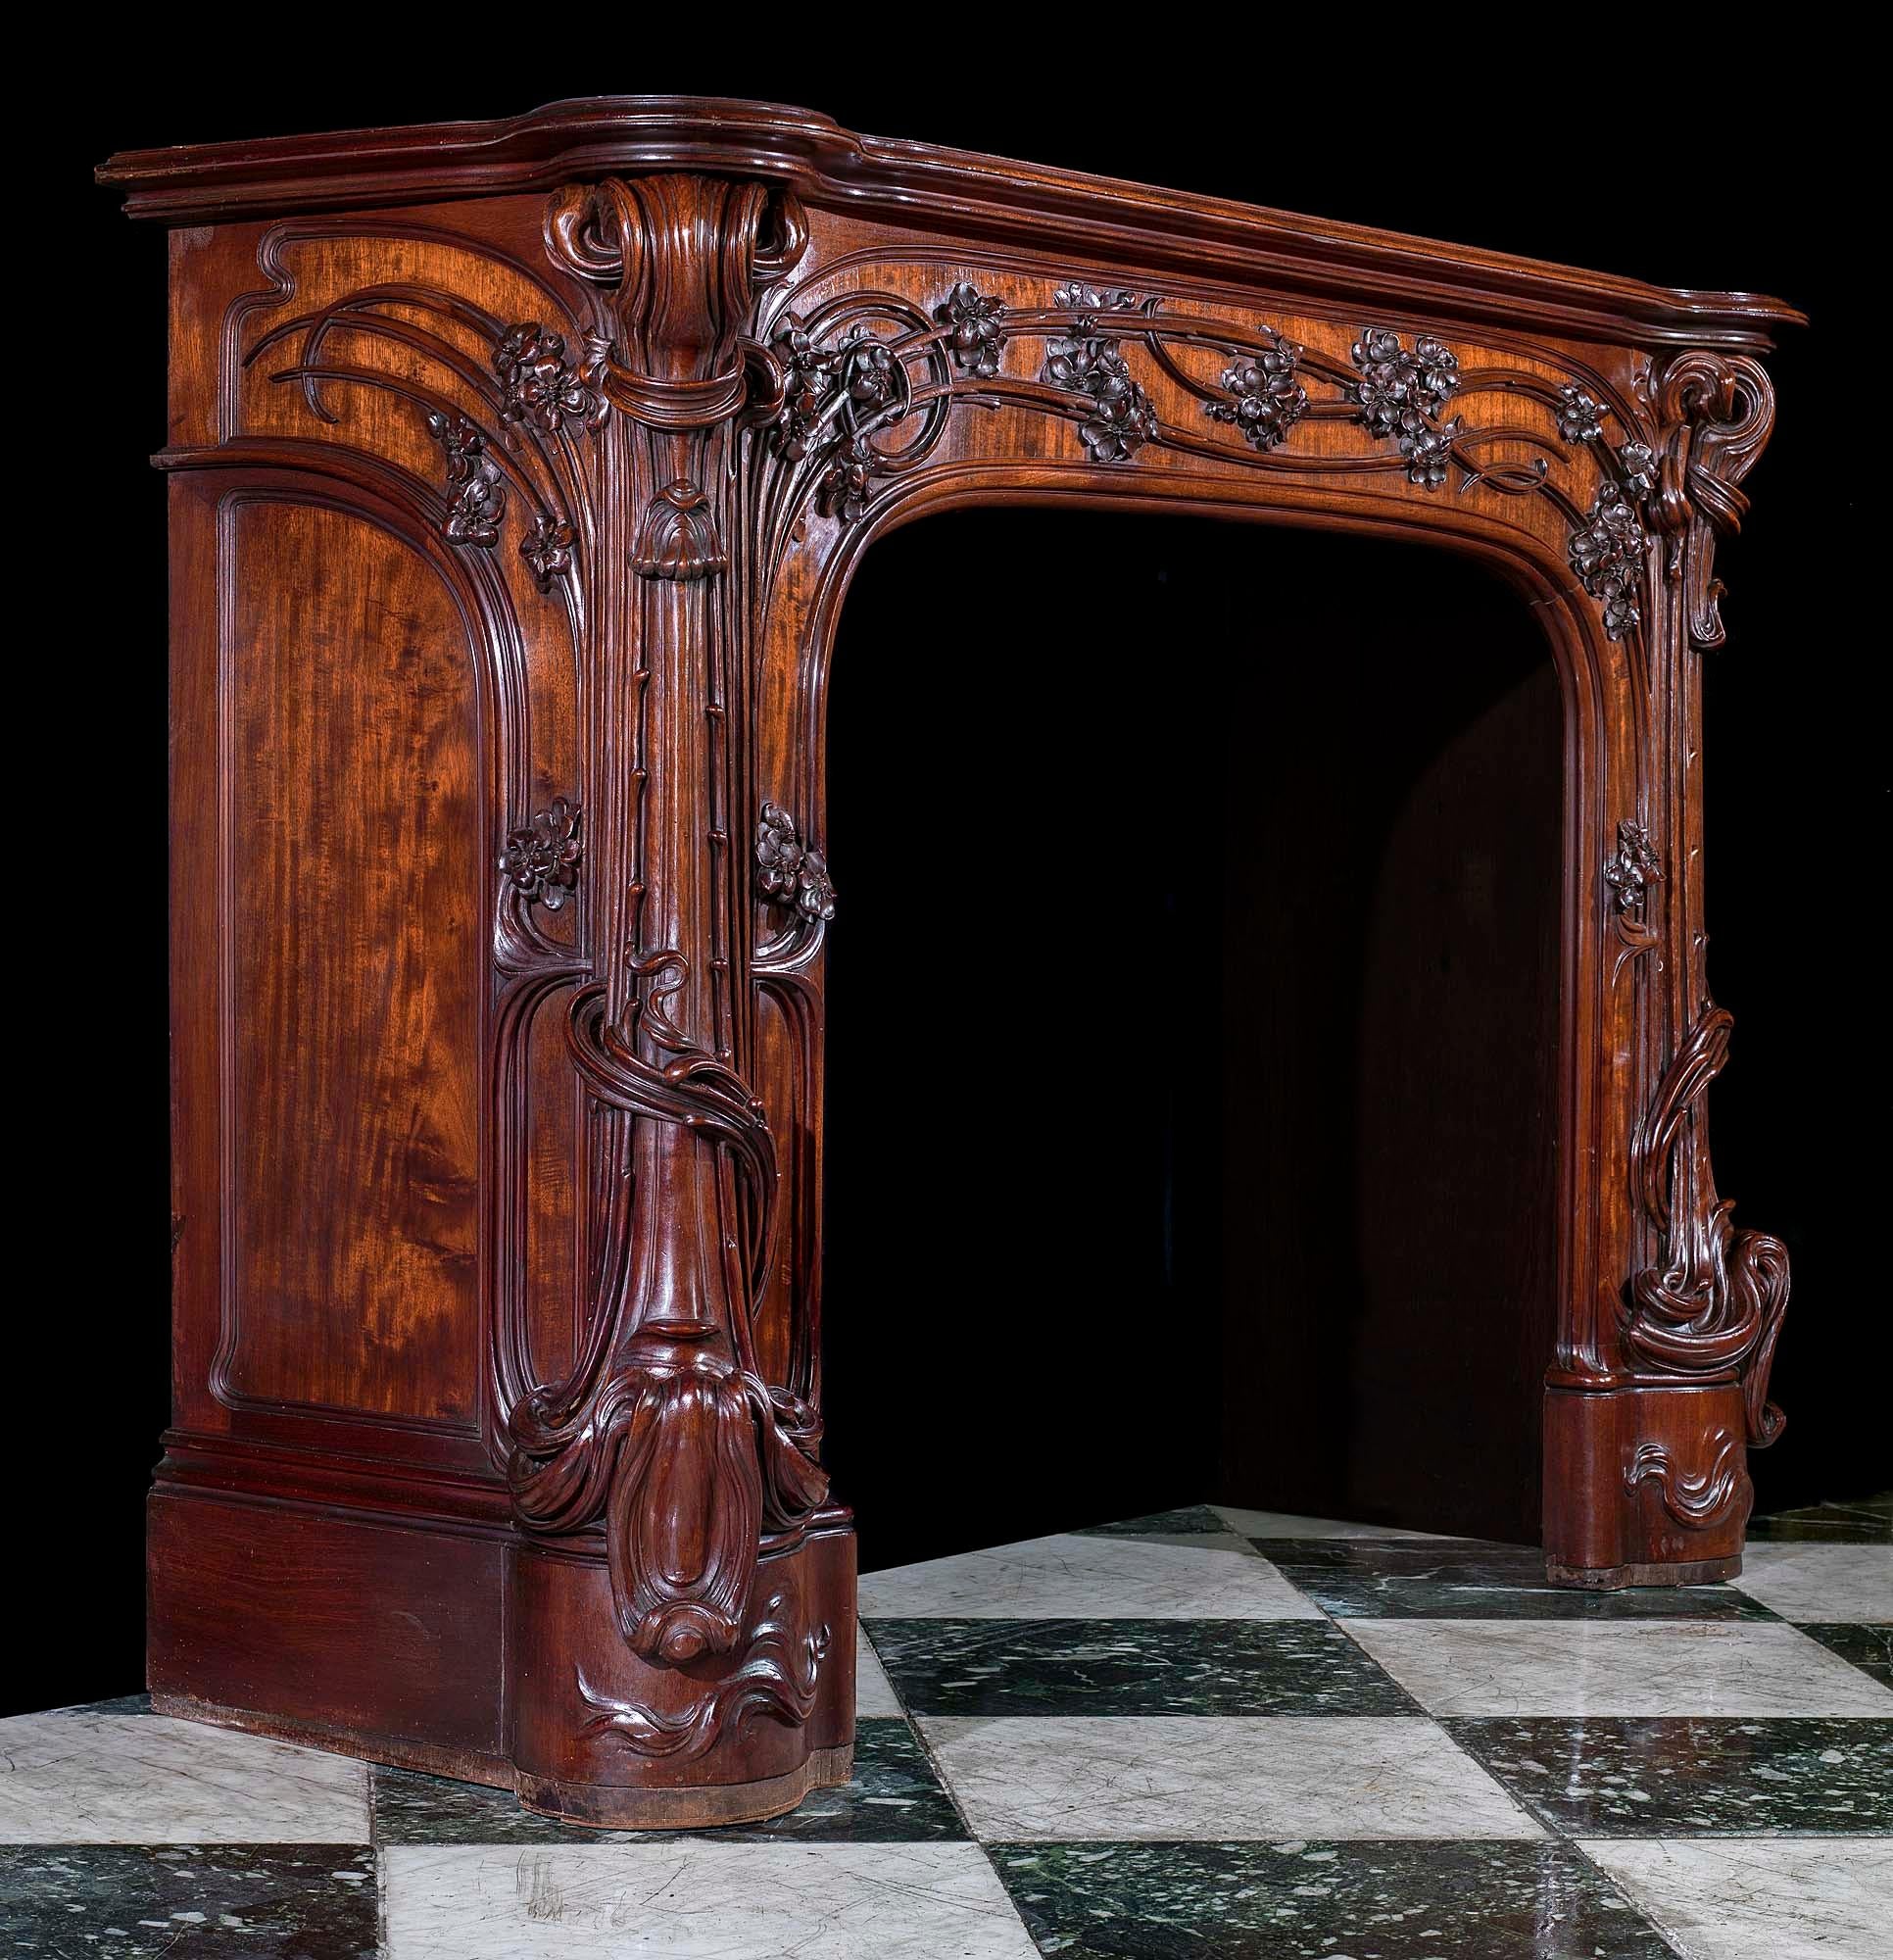 Hand-Carved Walnut Art Nouveau Fireplace Attributed to Majorelle